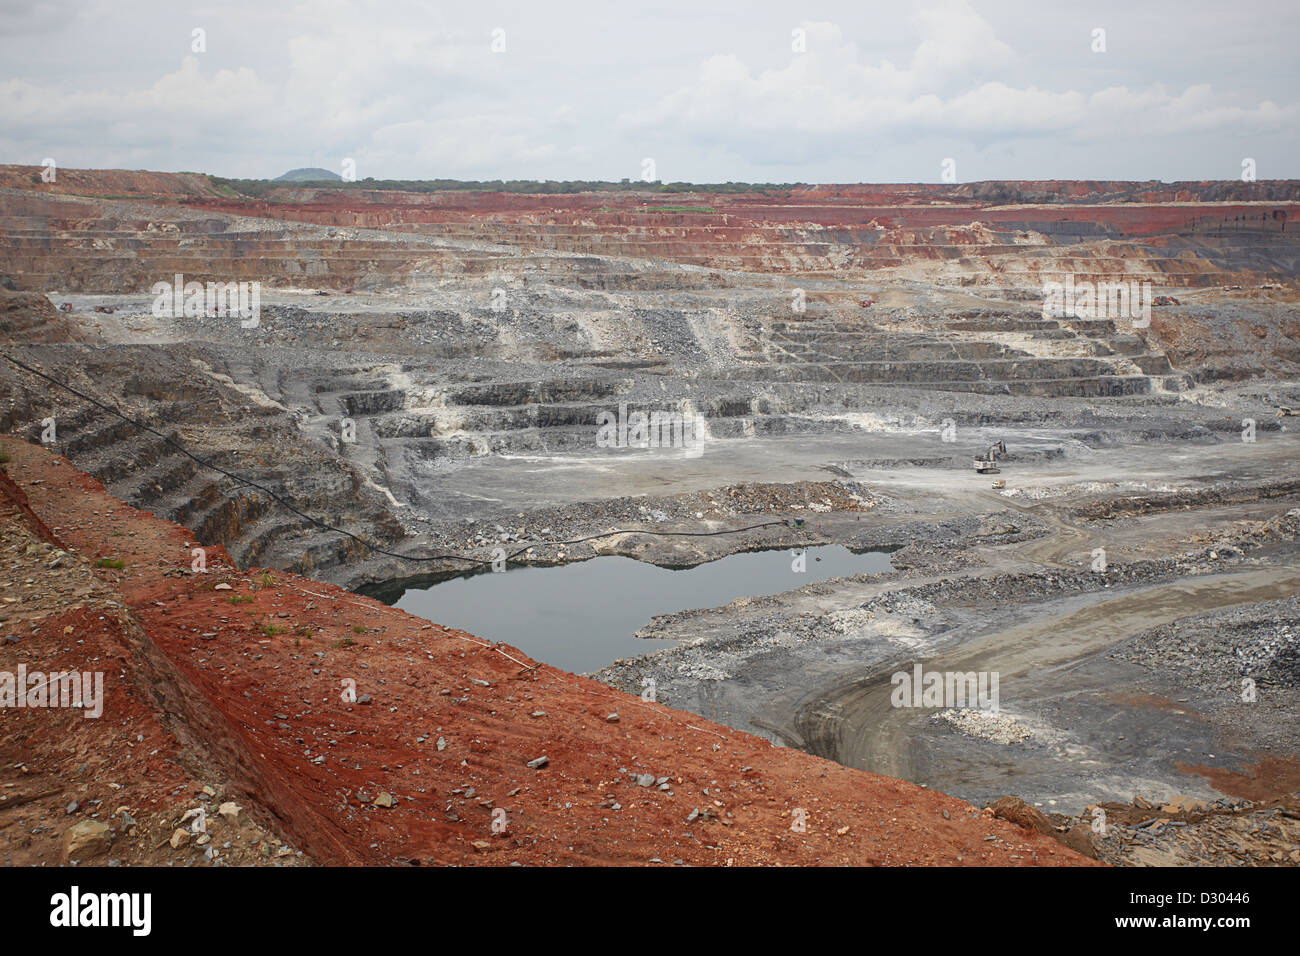 Kansanshi open cast copper mine 80% owned by Kansanshi Mining PLC, a First Quantum subsidiary. Stock Photo